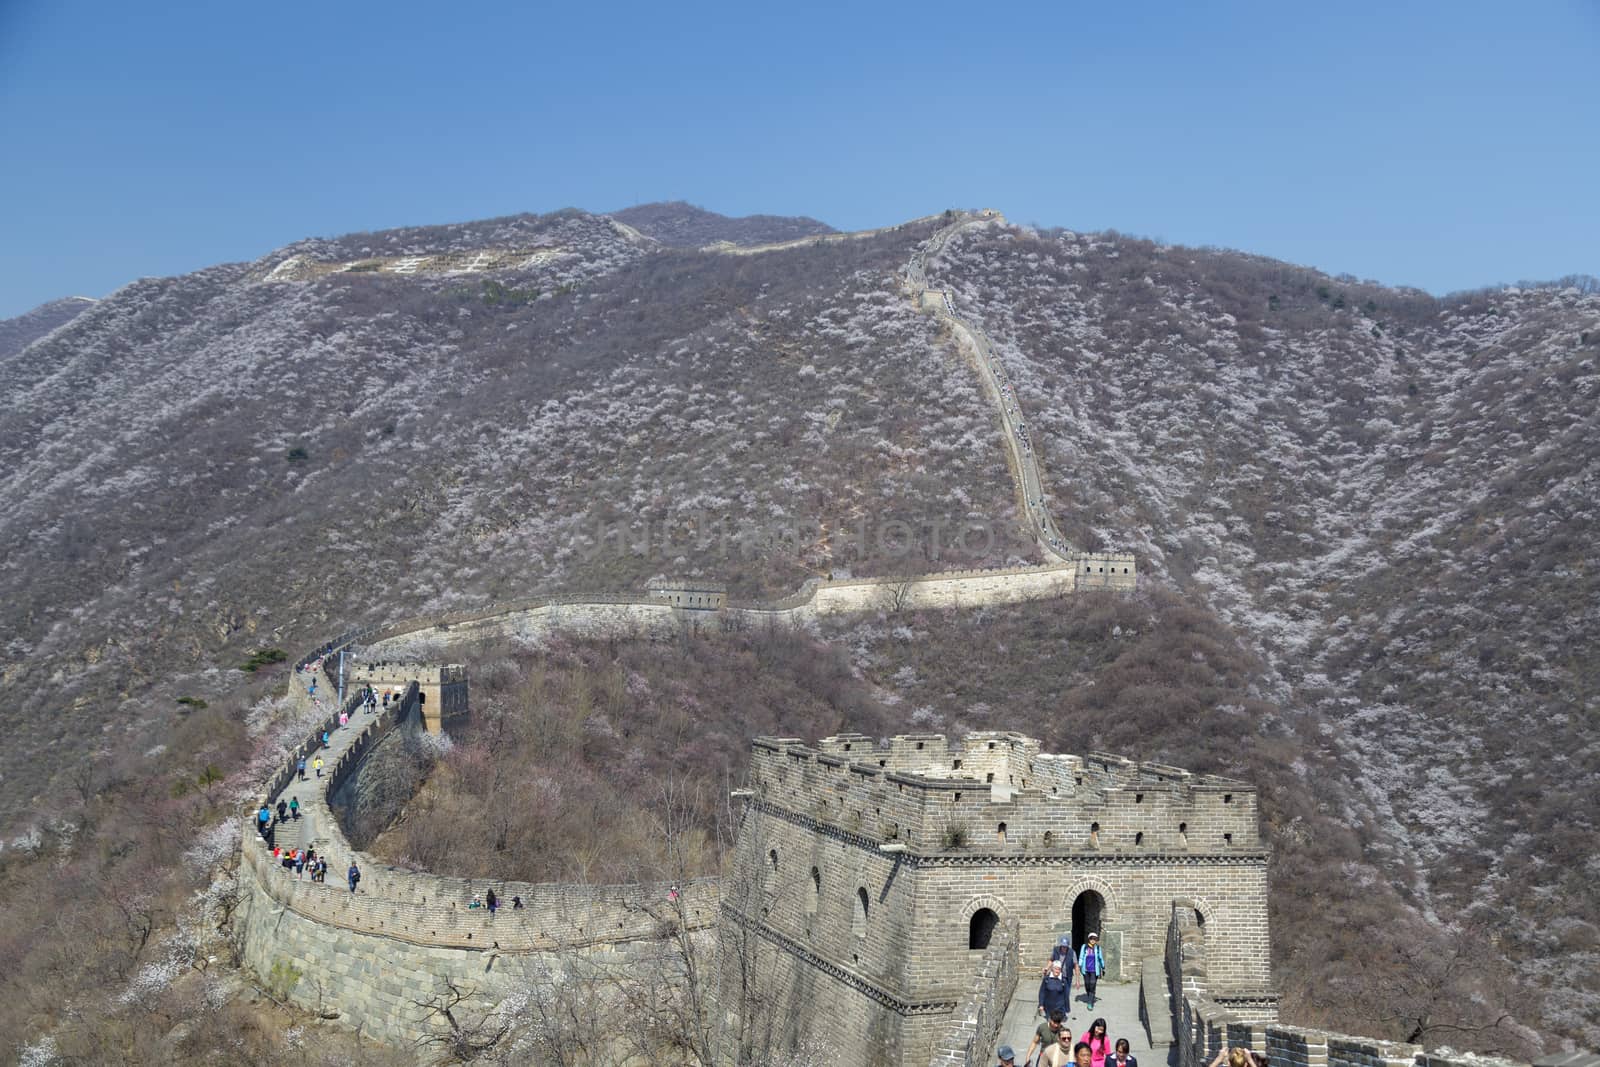 Beijing, China - CIRCA 2020: Great Wall of China in a green forest landscape at Mutianyu in Huairou District near Beijing, China. Autumn view of Grate Wall of China by dugulan